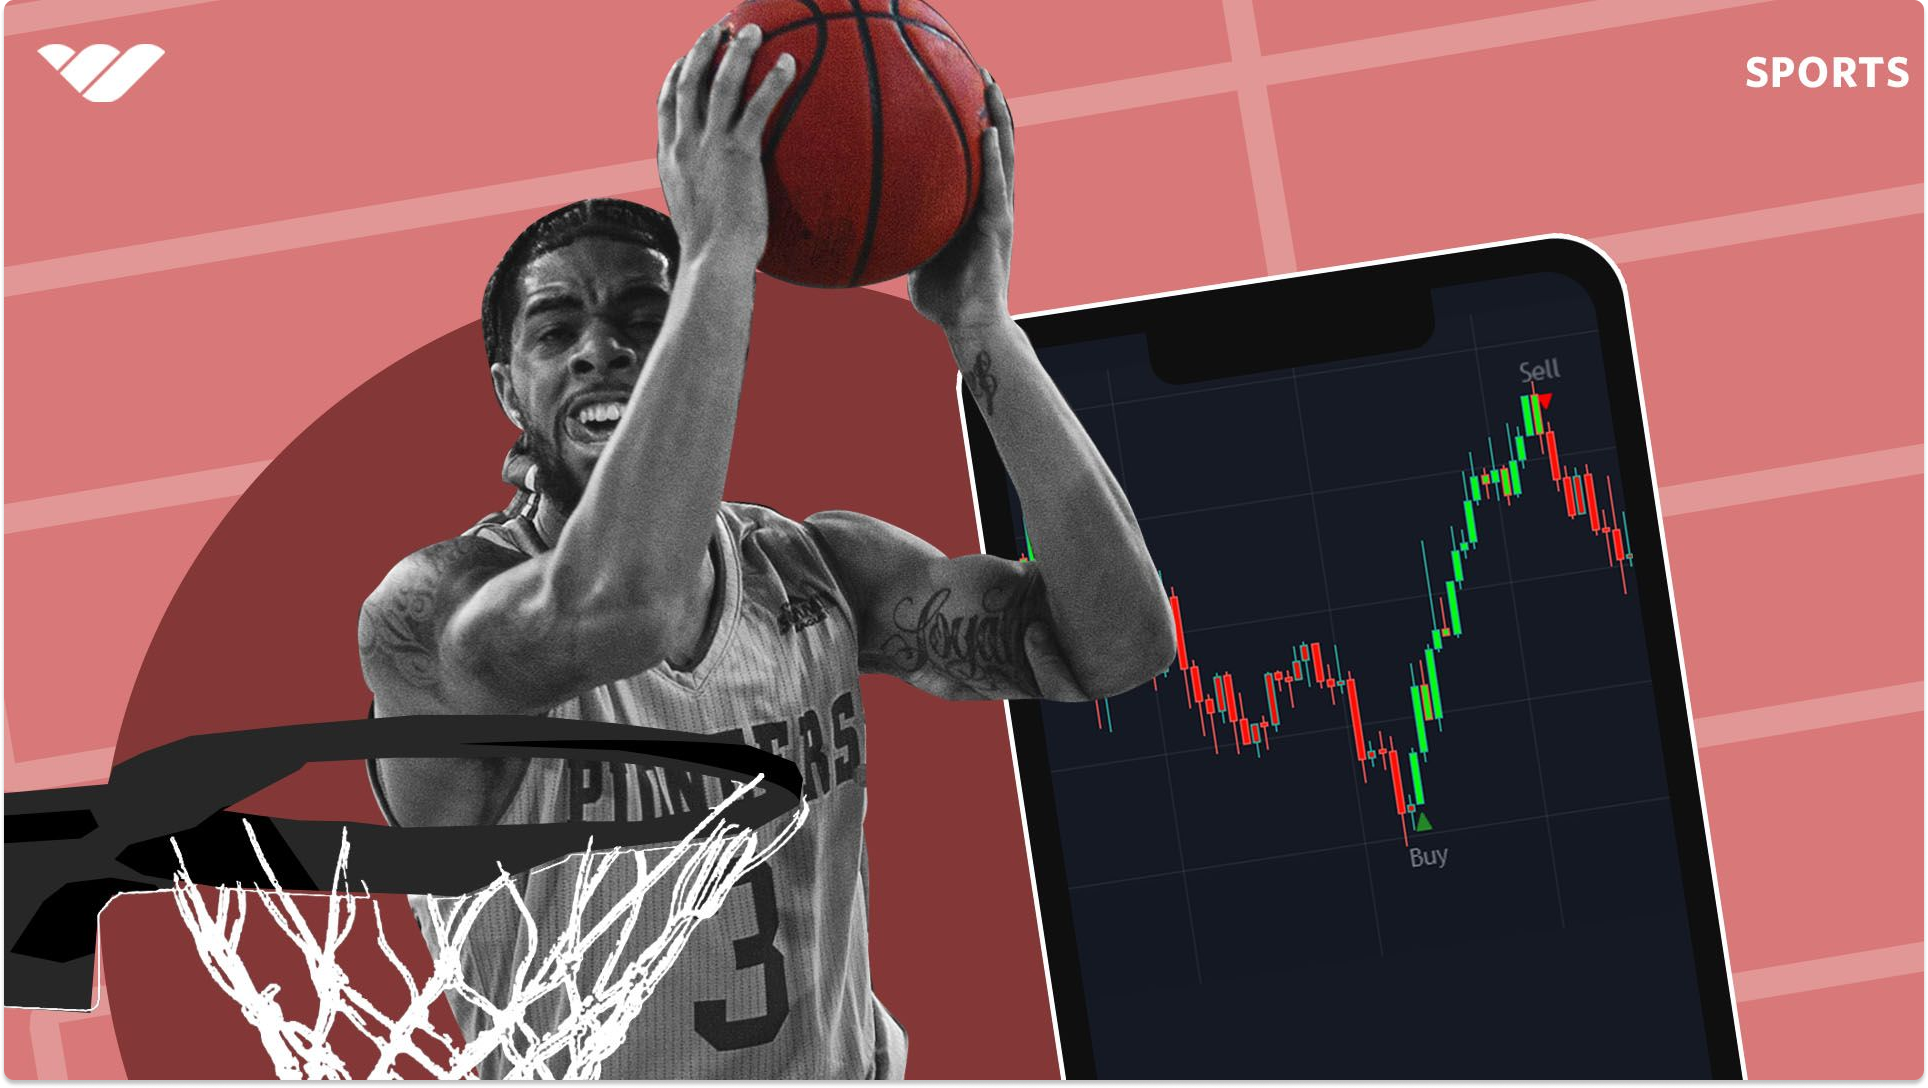 Image of basketball player and sports odds.